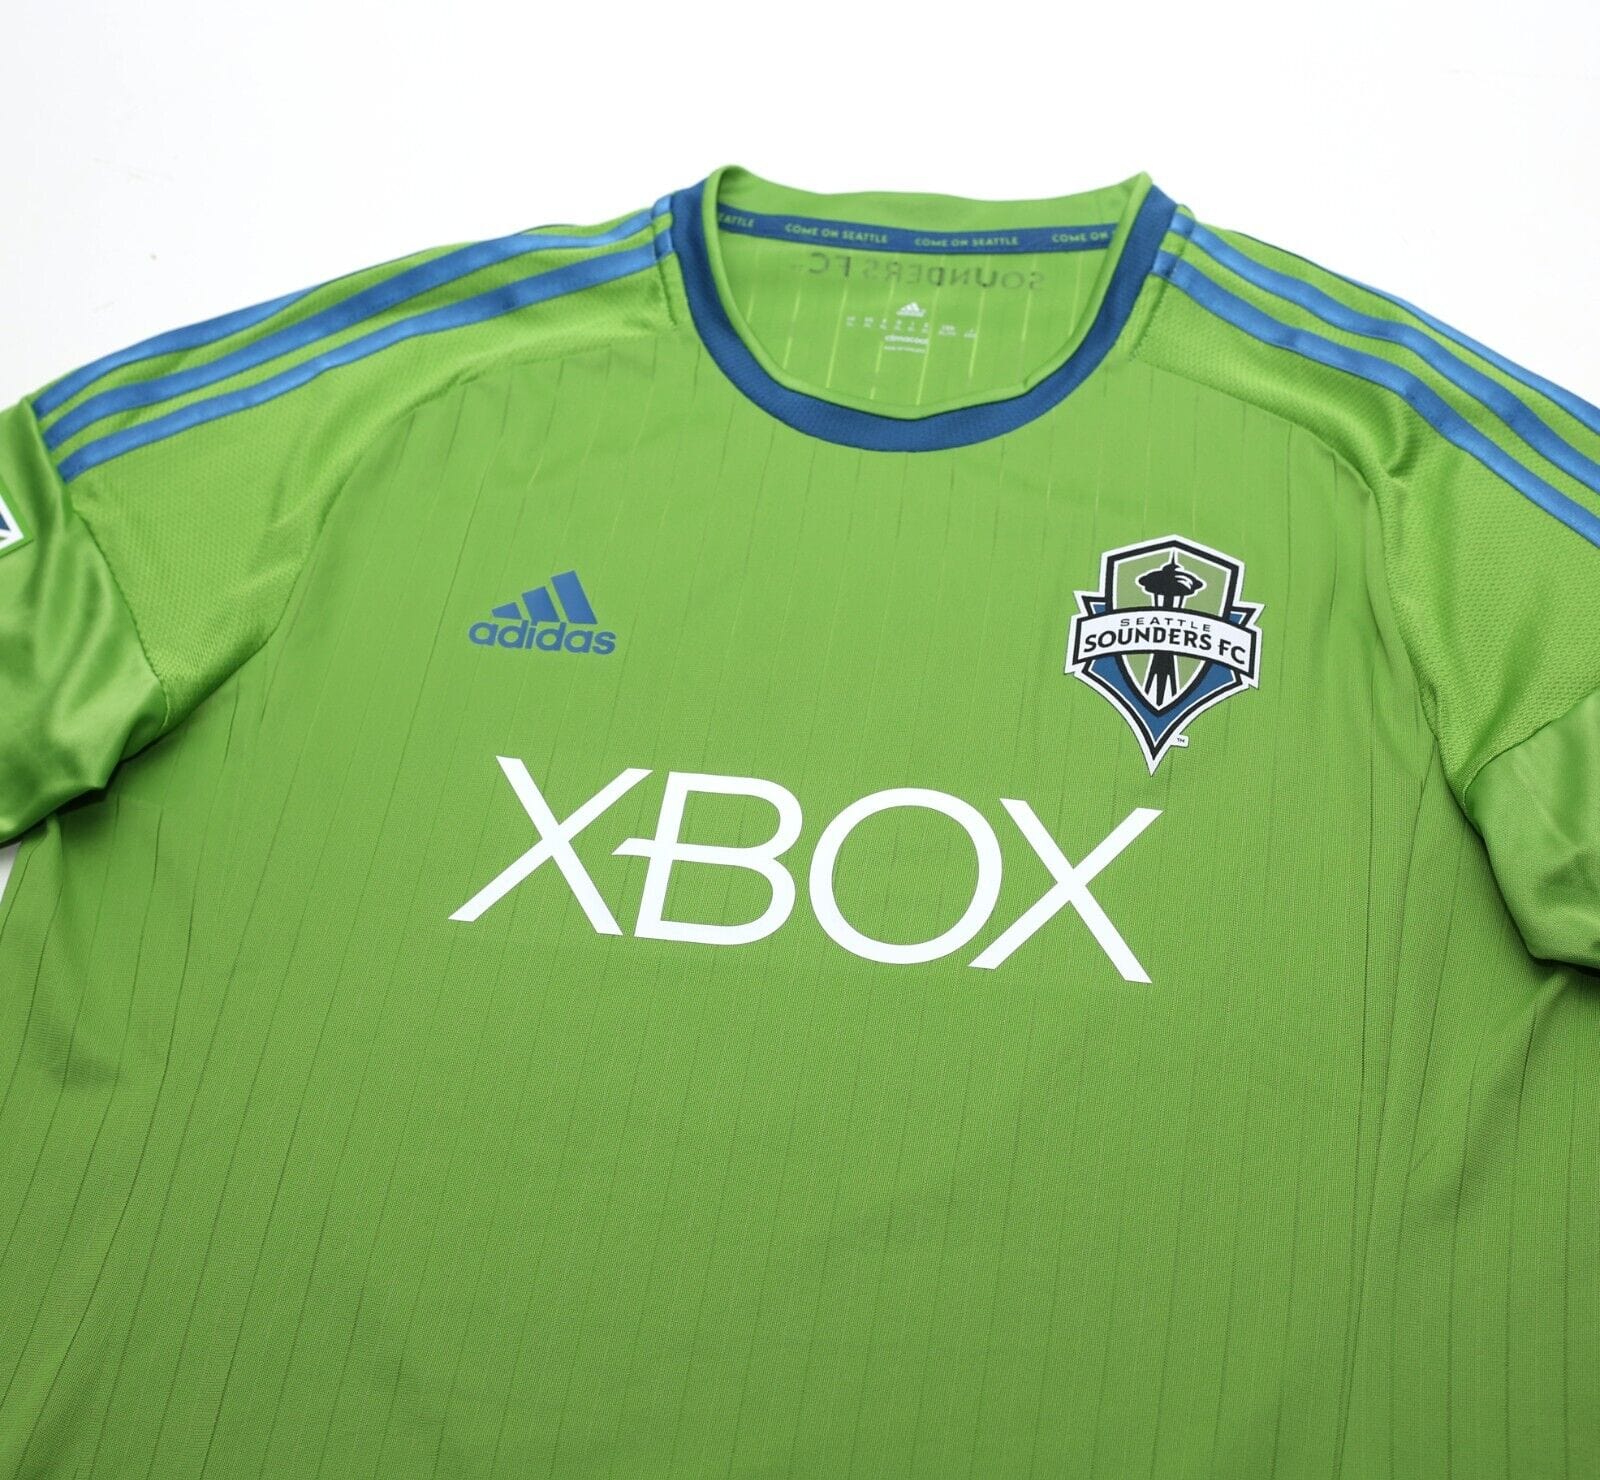 2015 DEMPSEY #2 Seattle Sounders adidas Player Issue Spec LS Home Football Shirt (XL)